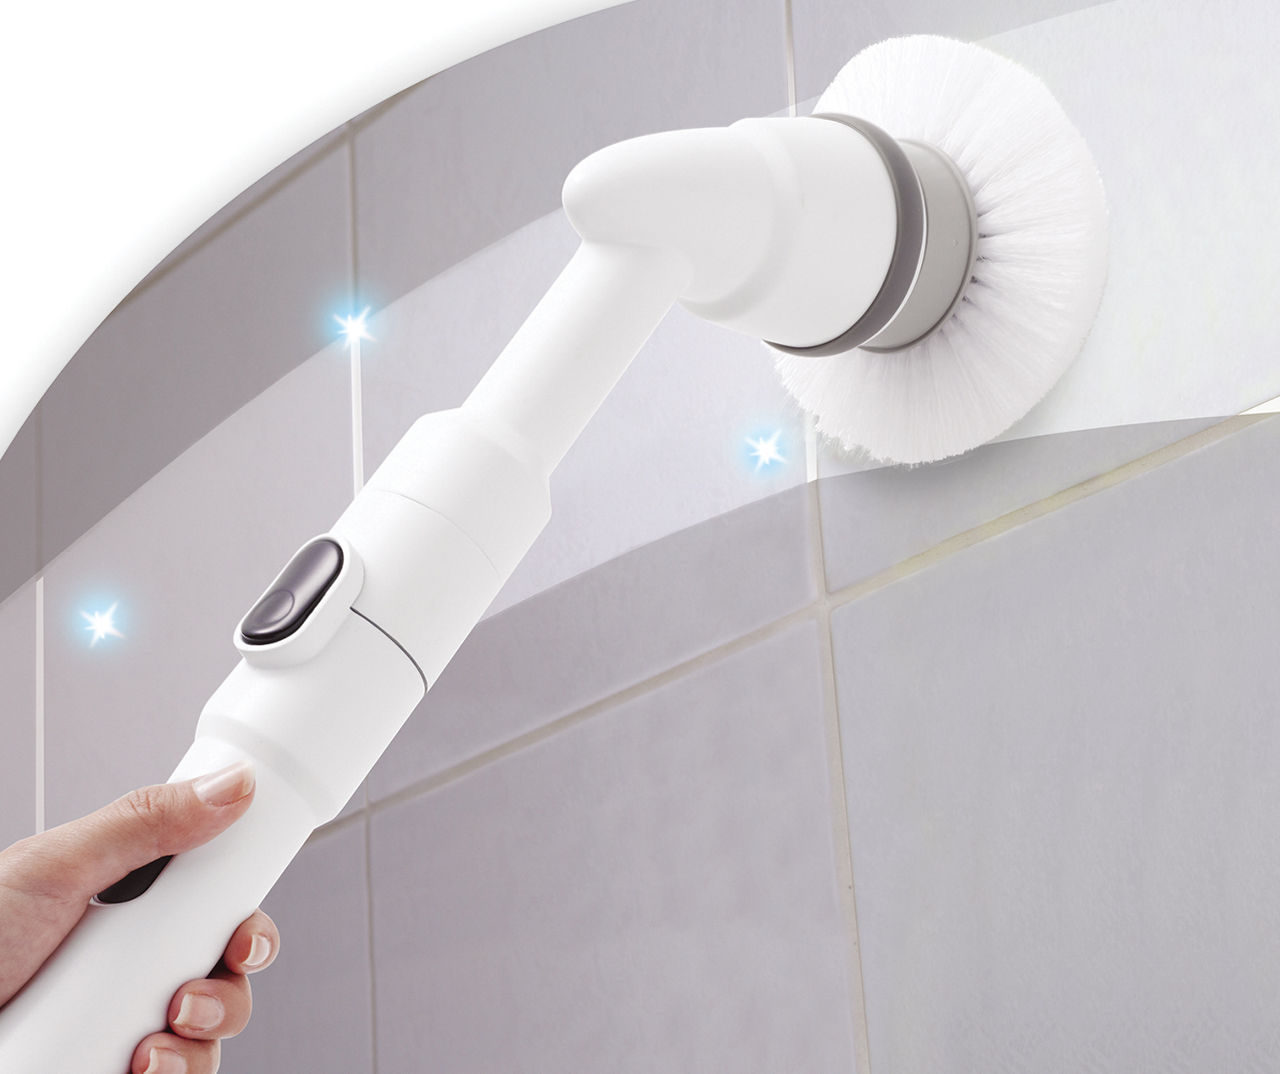 Electric Cleaning Turbo Scrub Brush Wireless Bathroom Cleaning